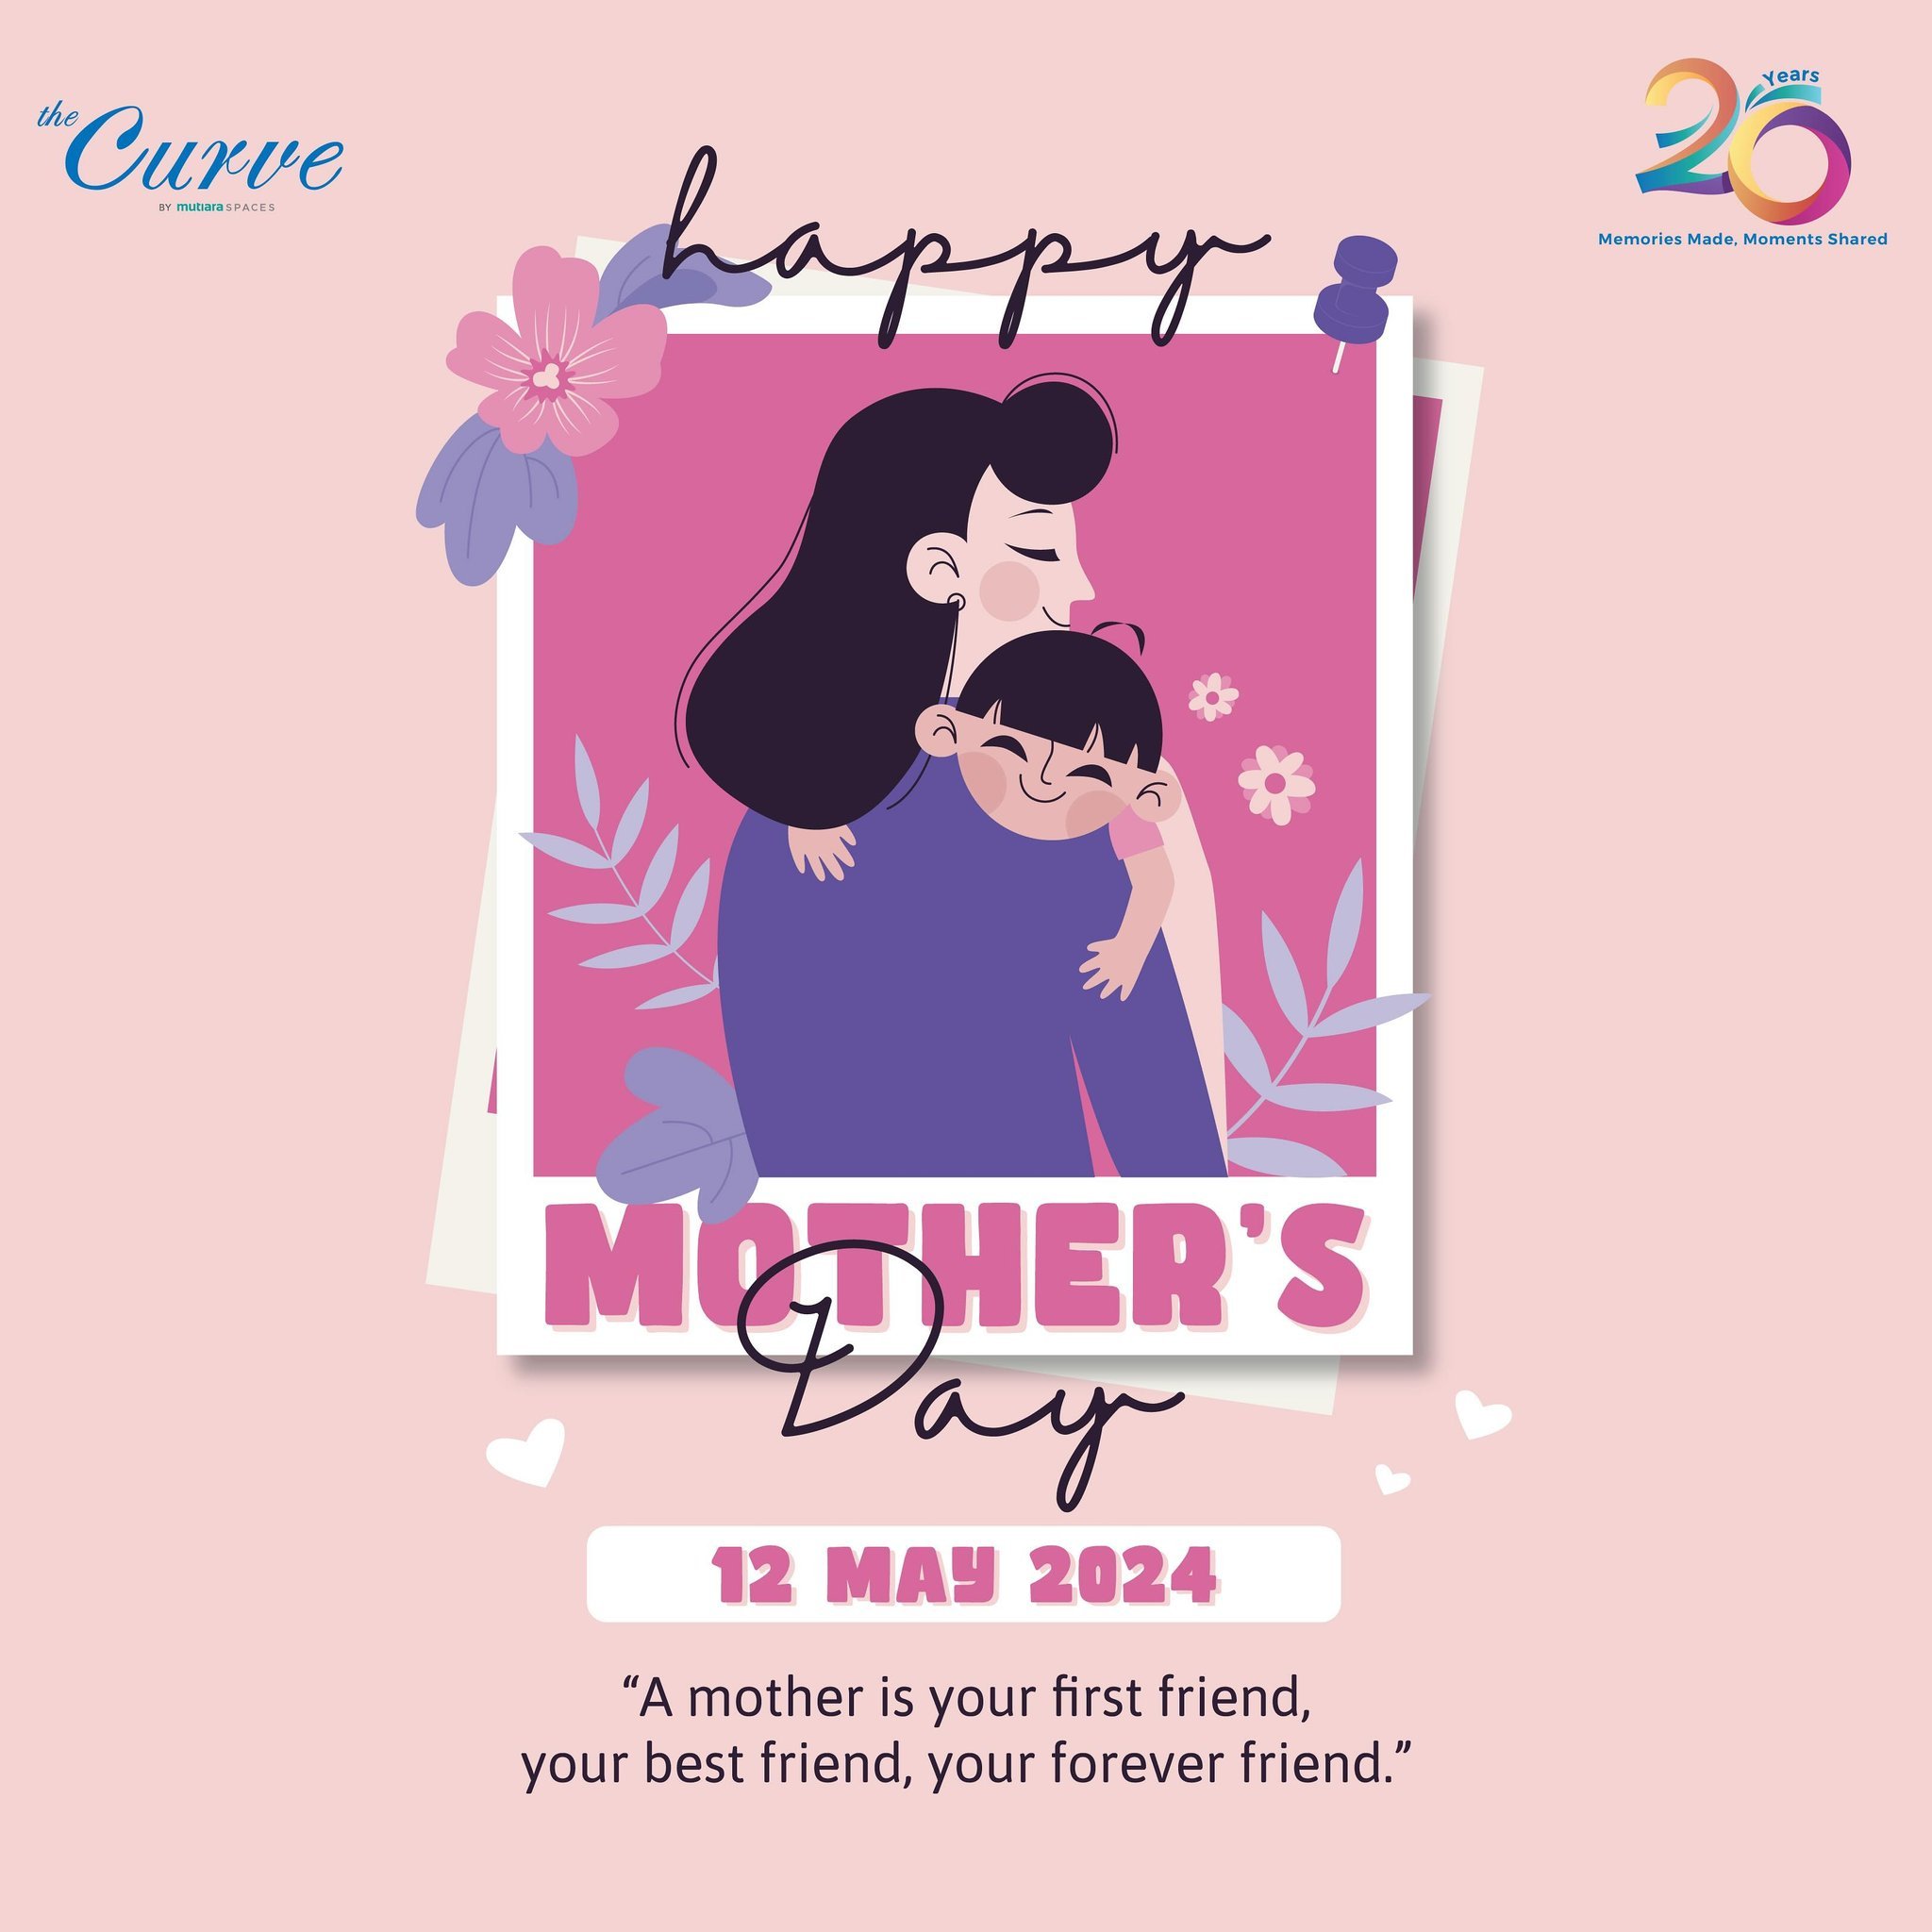 Happy Mother&rsquo;s Day to all the amazing moms out there ❤️ Big hugs from the Curve Management 🫶

#theCurve #theCurvemall #theCurveMutiaraDamansara #mothersday